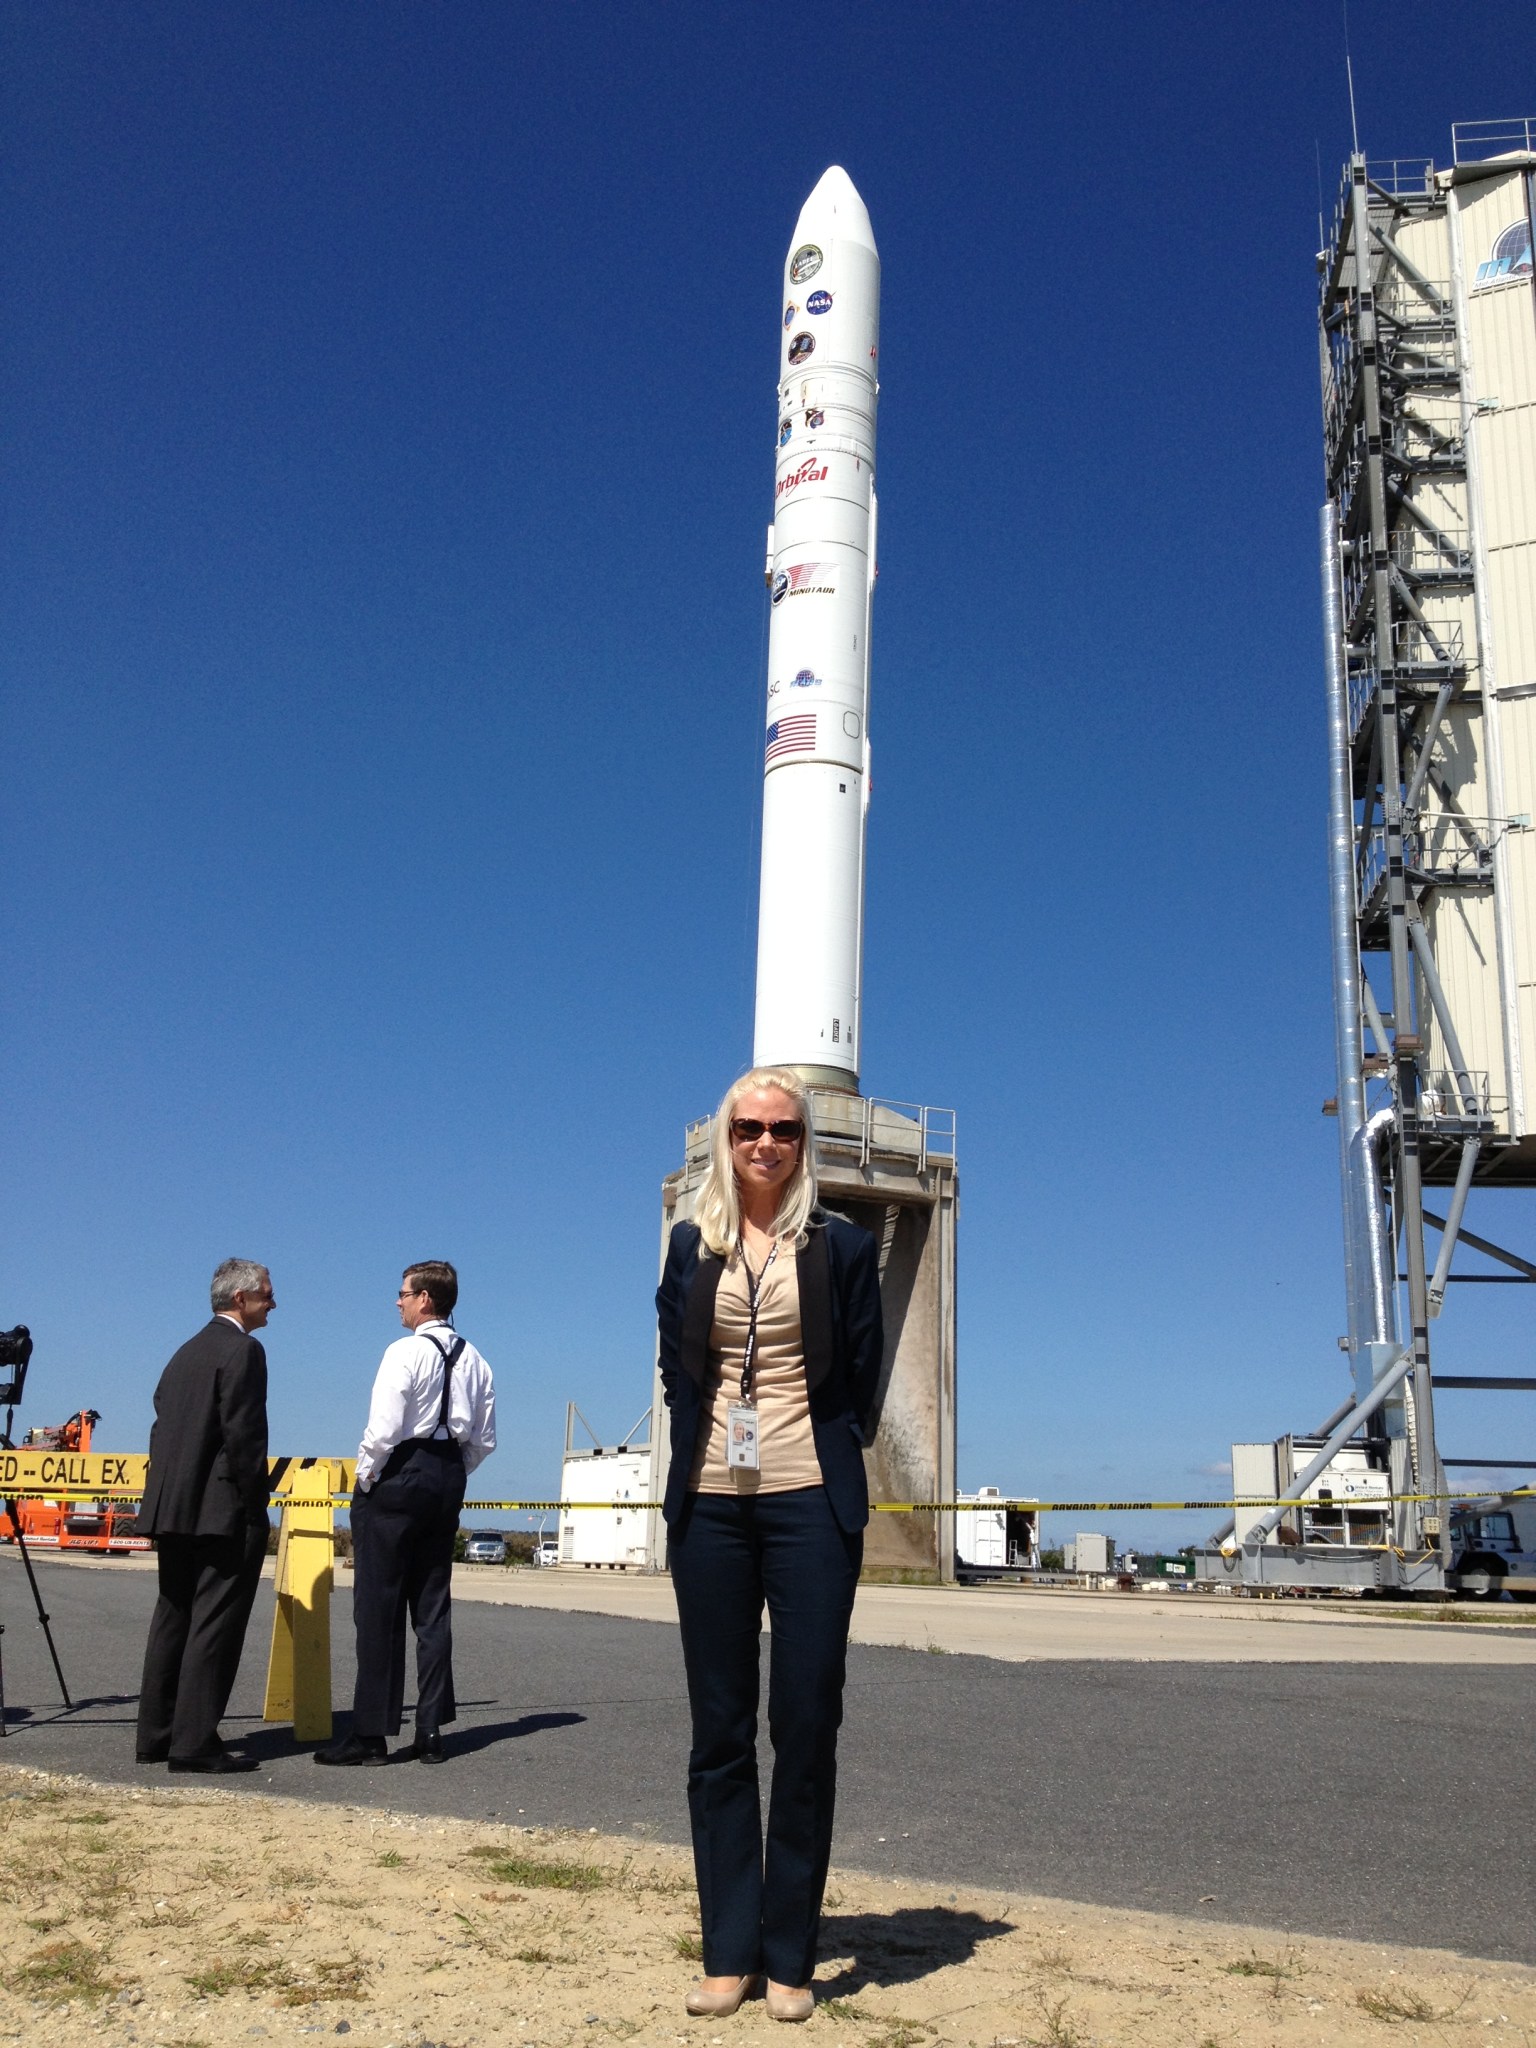 Woman with blonde hair and fair skin stands in front of a rocket